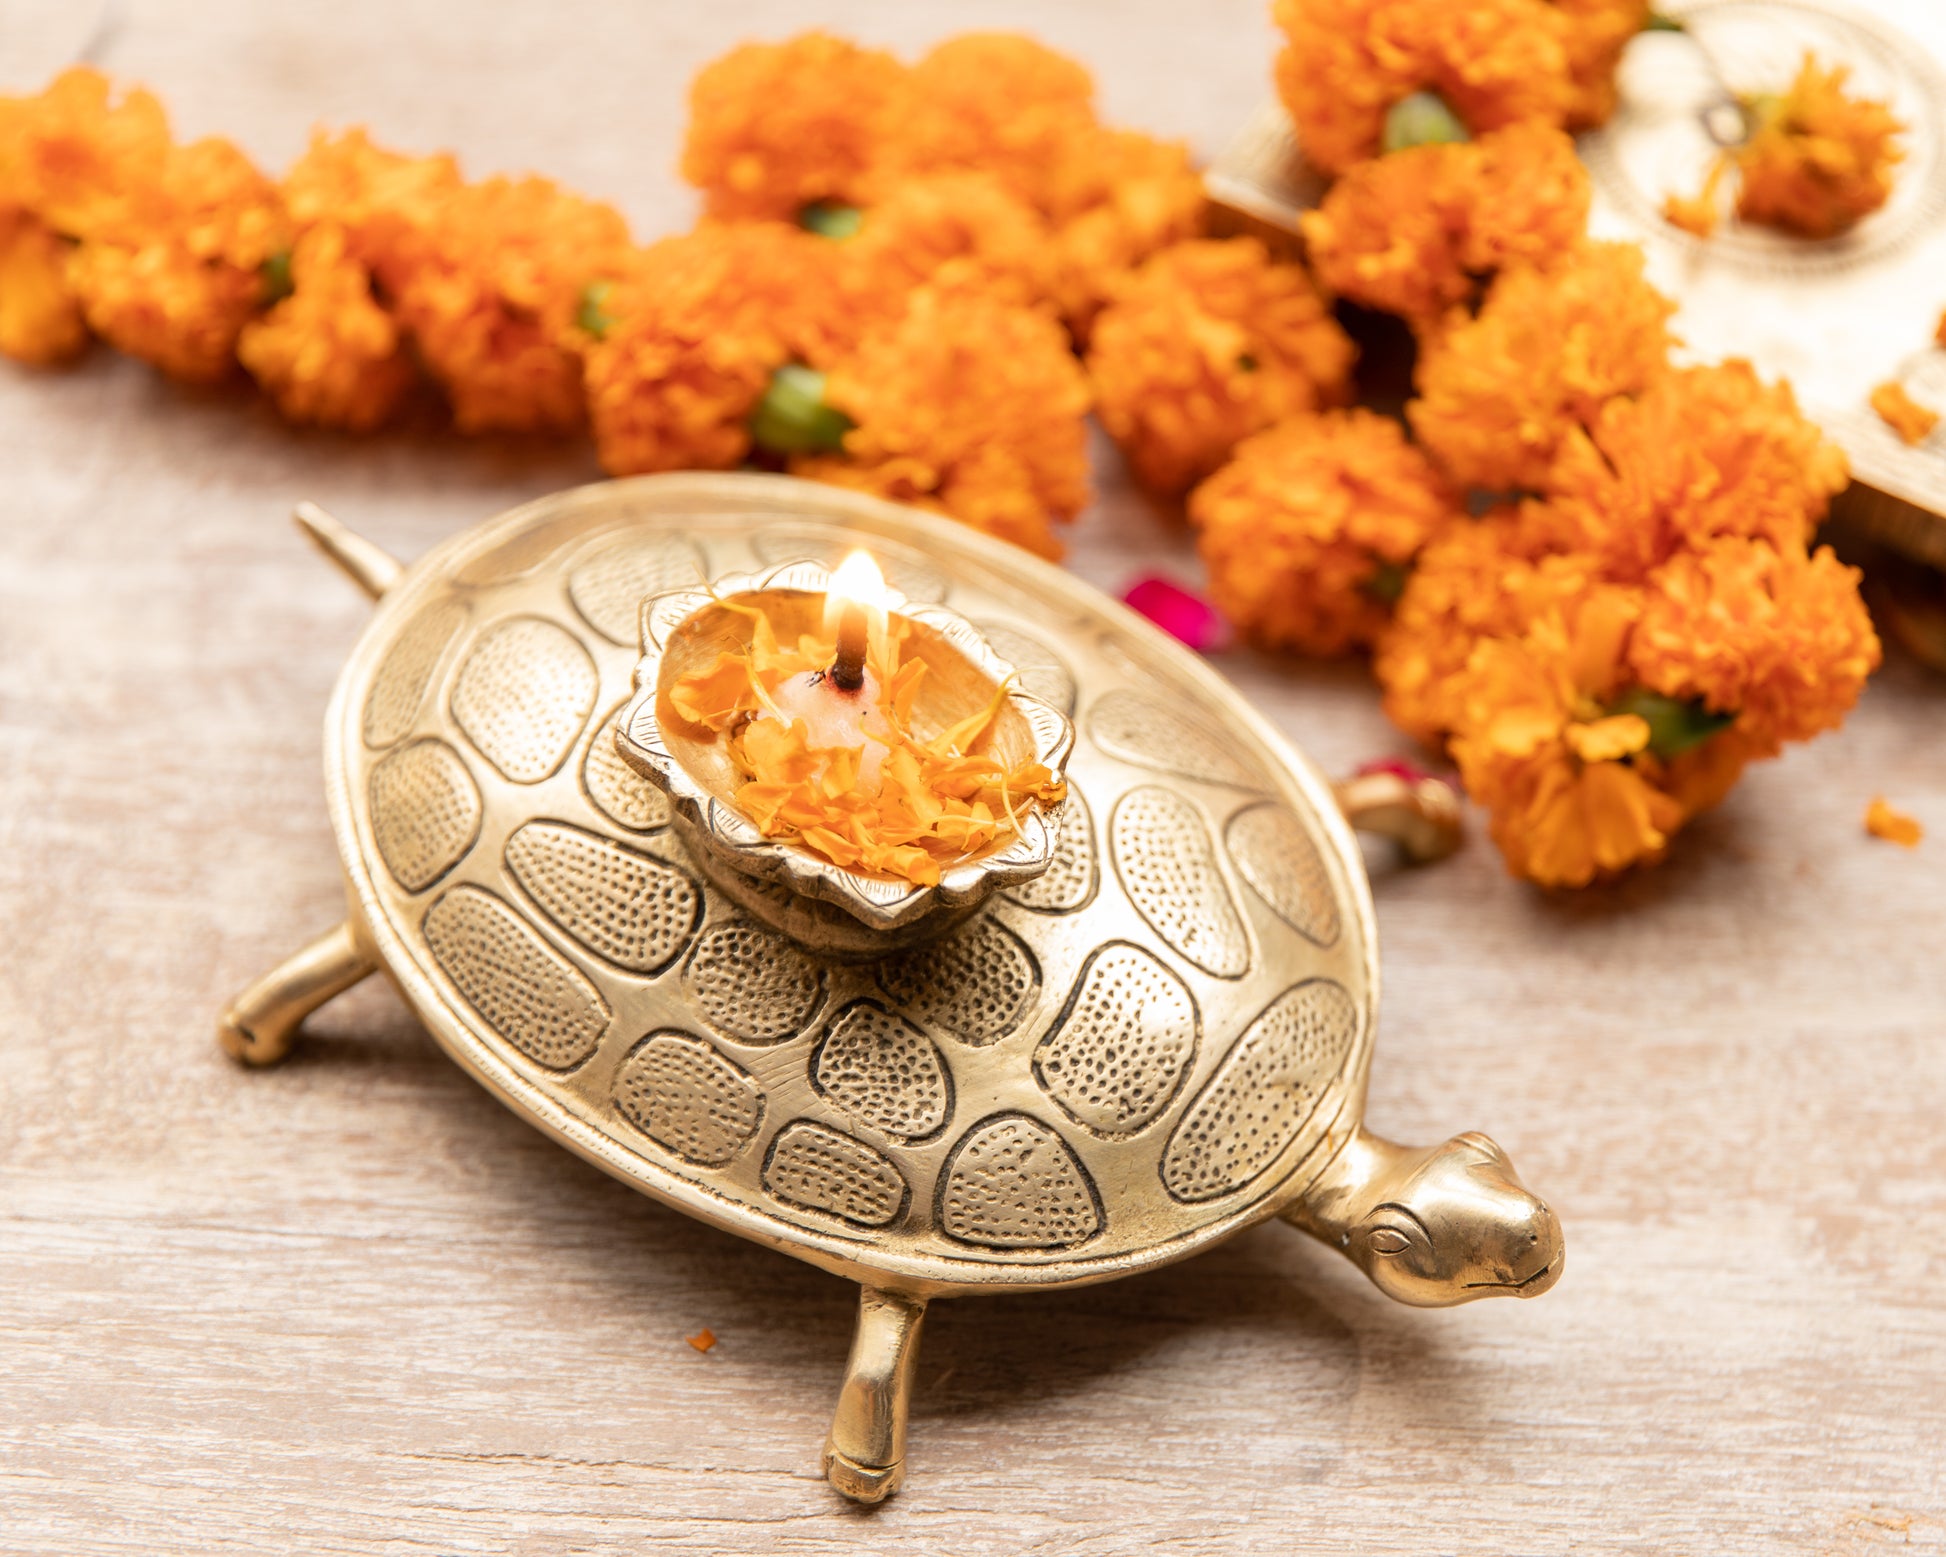 Brass Tortoise Diya With The Positive Vibrations of The Tortiose Combined with the ritualistic practices of India To Bring In Positive Vibrations. 